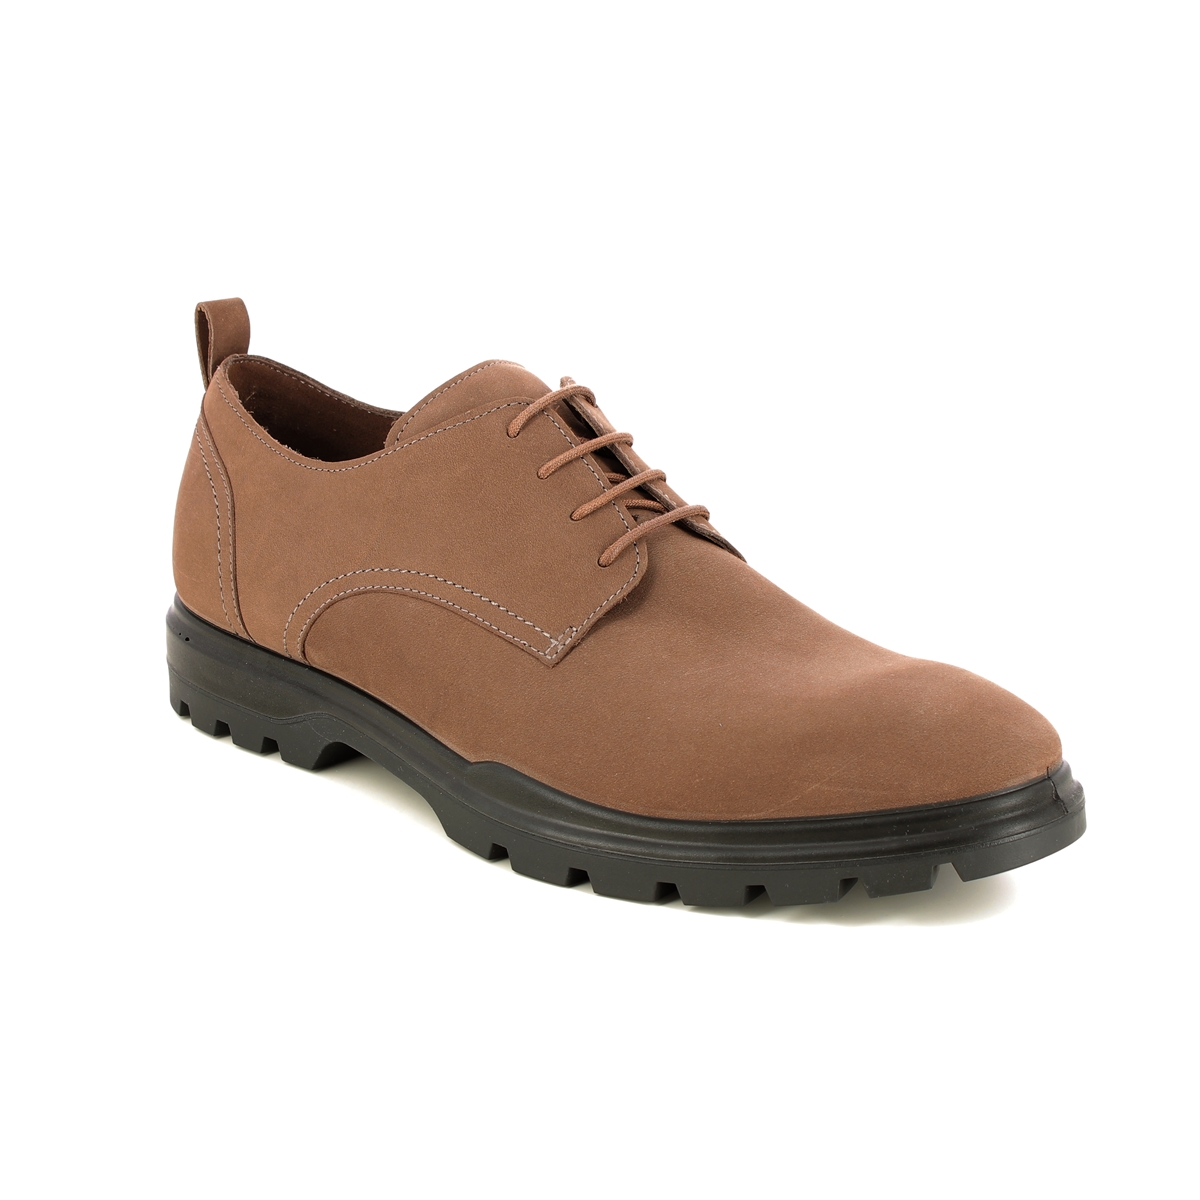 ECCO Citytray Avant Brown nubuck Mens comfort shoes 521864-02175 in a Plain Leather in Size 45